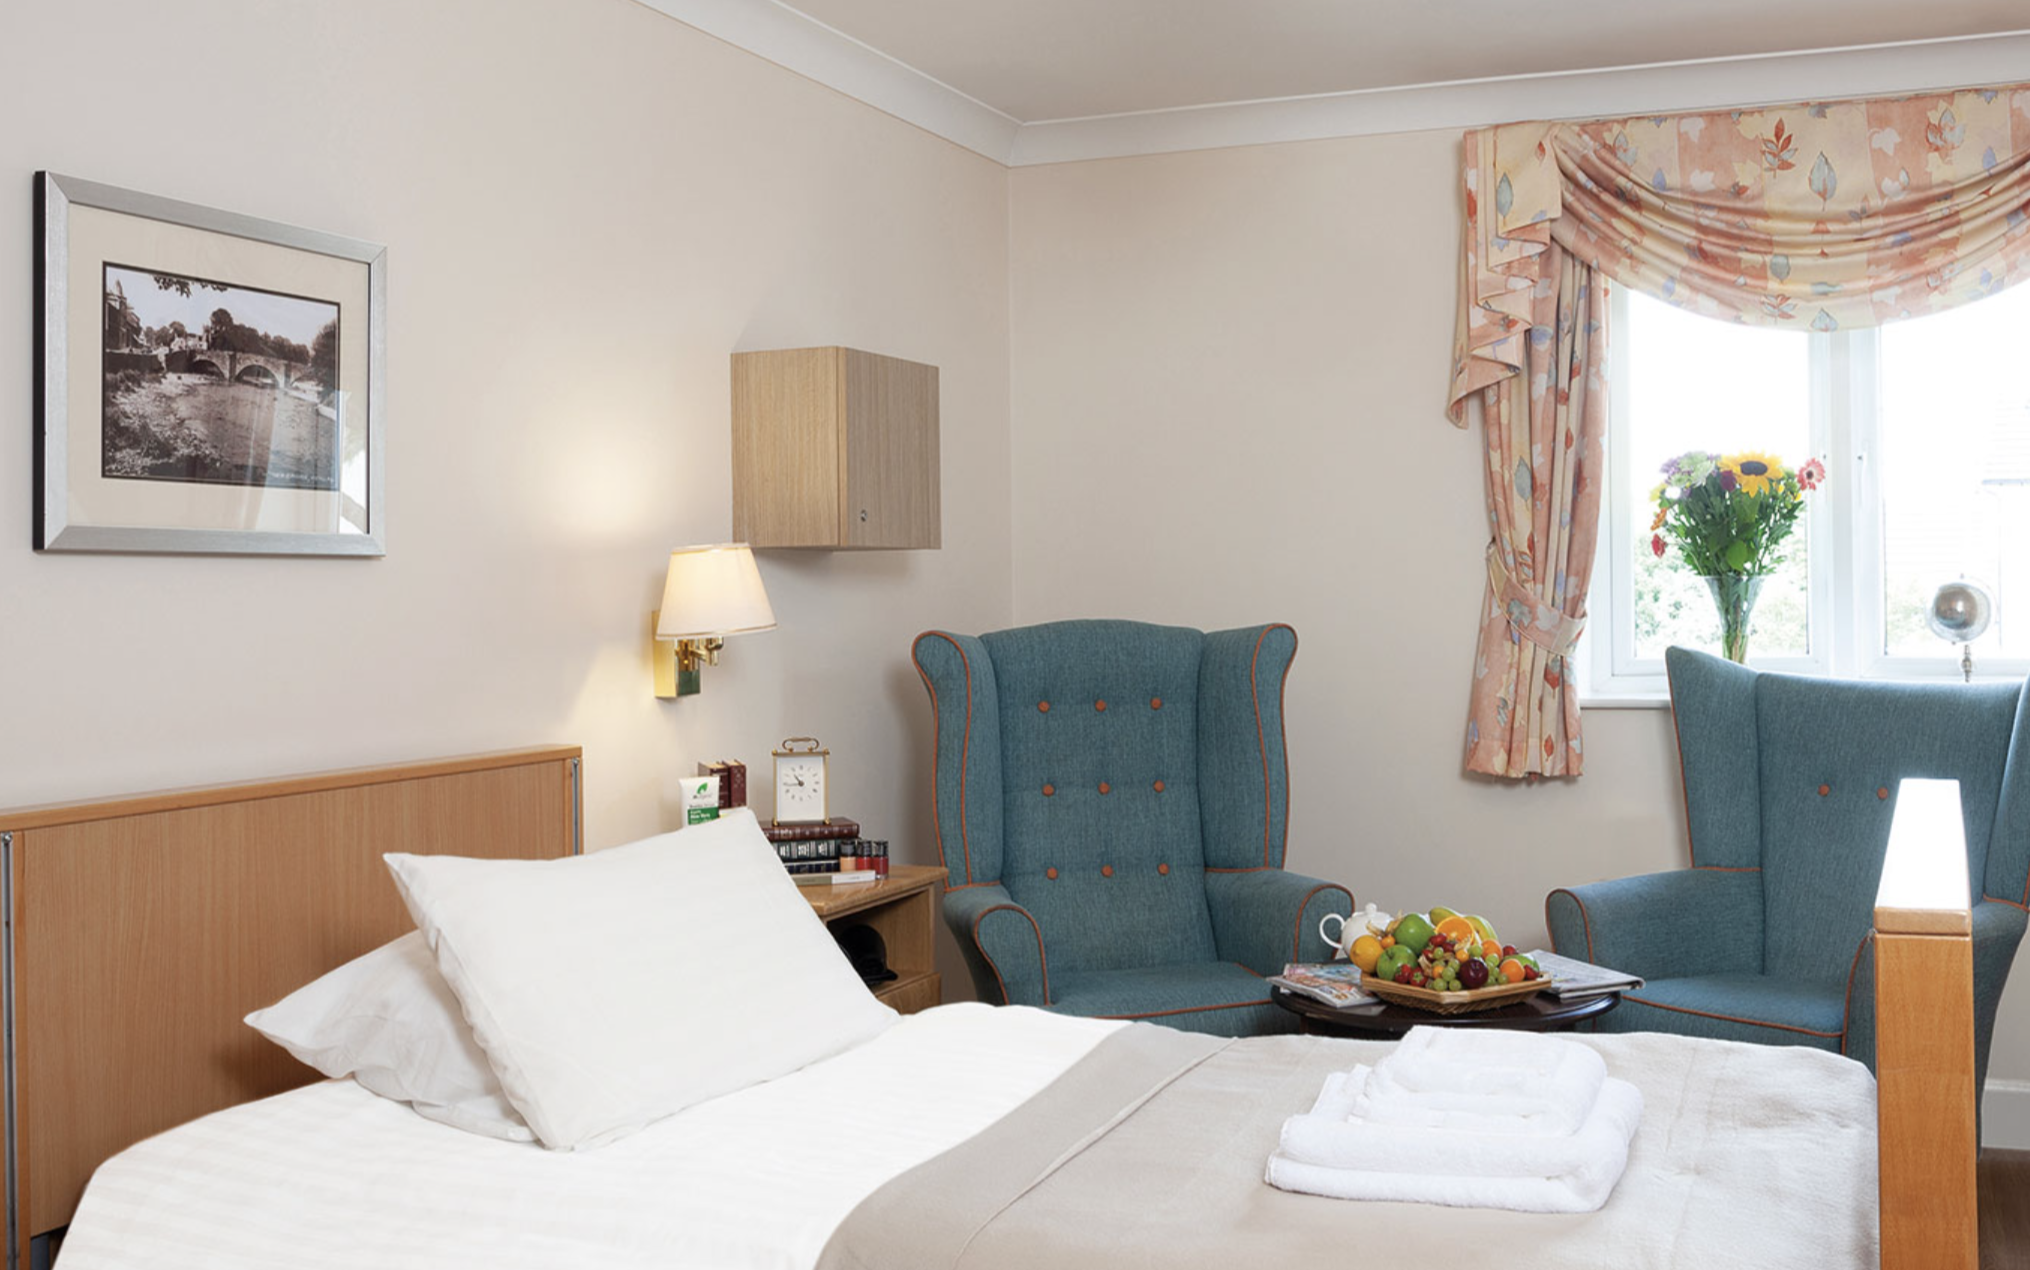 Bedroom of Heron Hill care home in Kendal, Cumbria